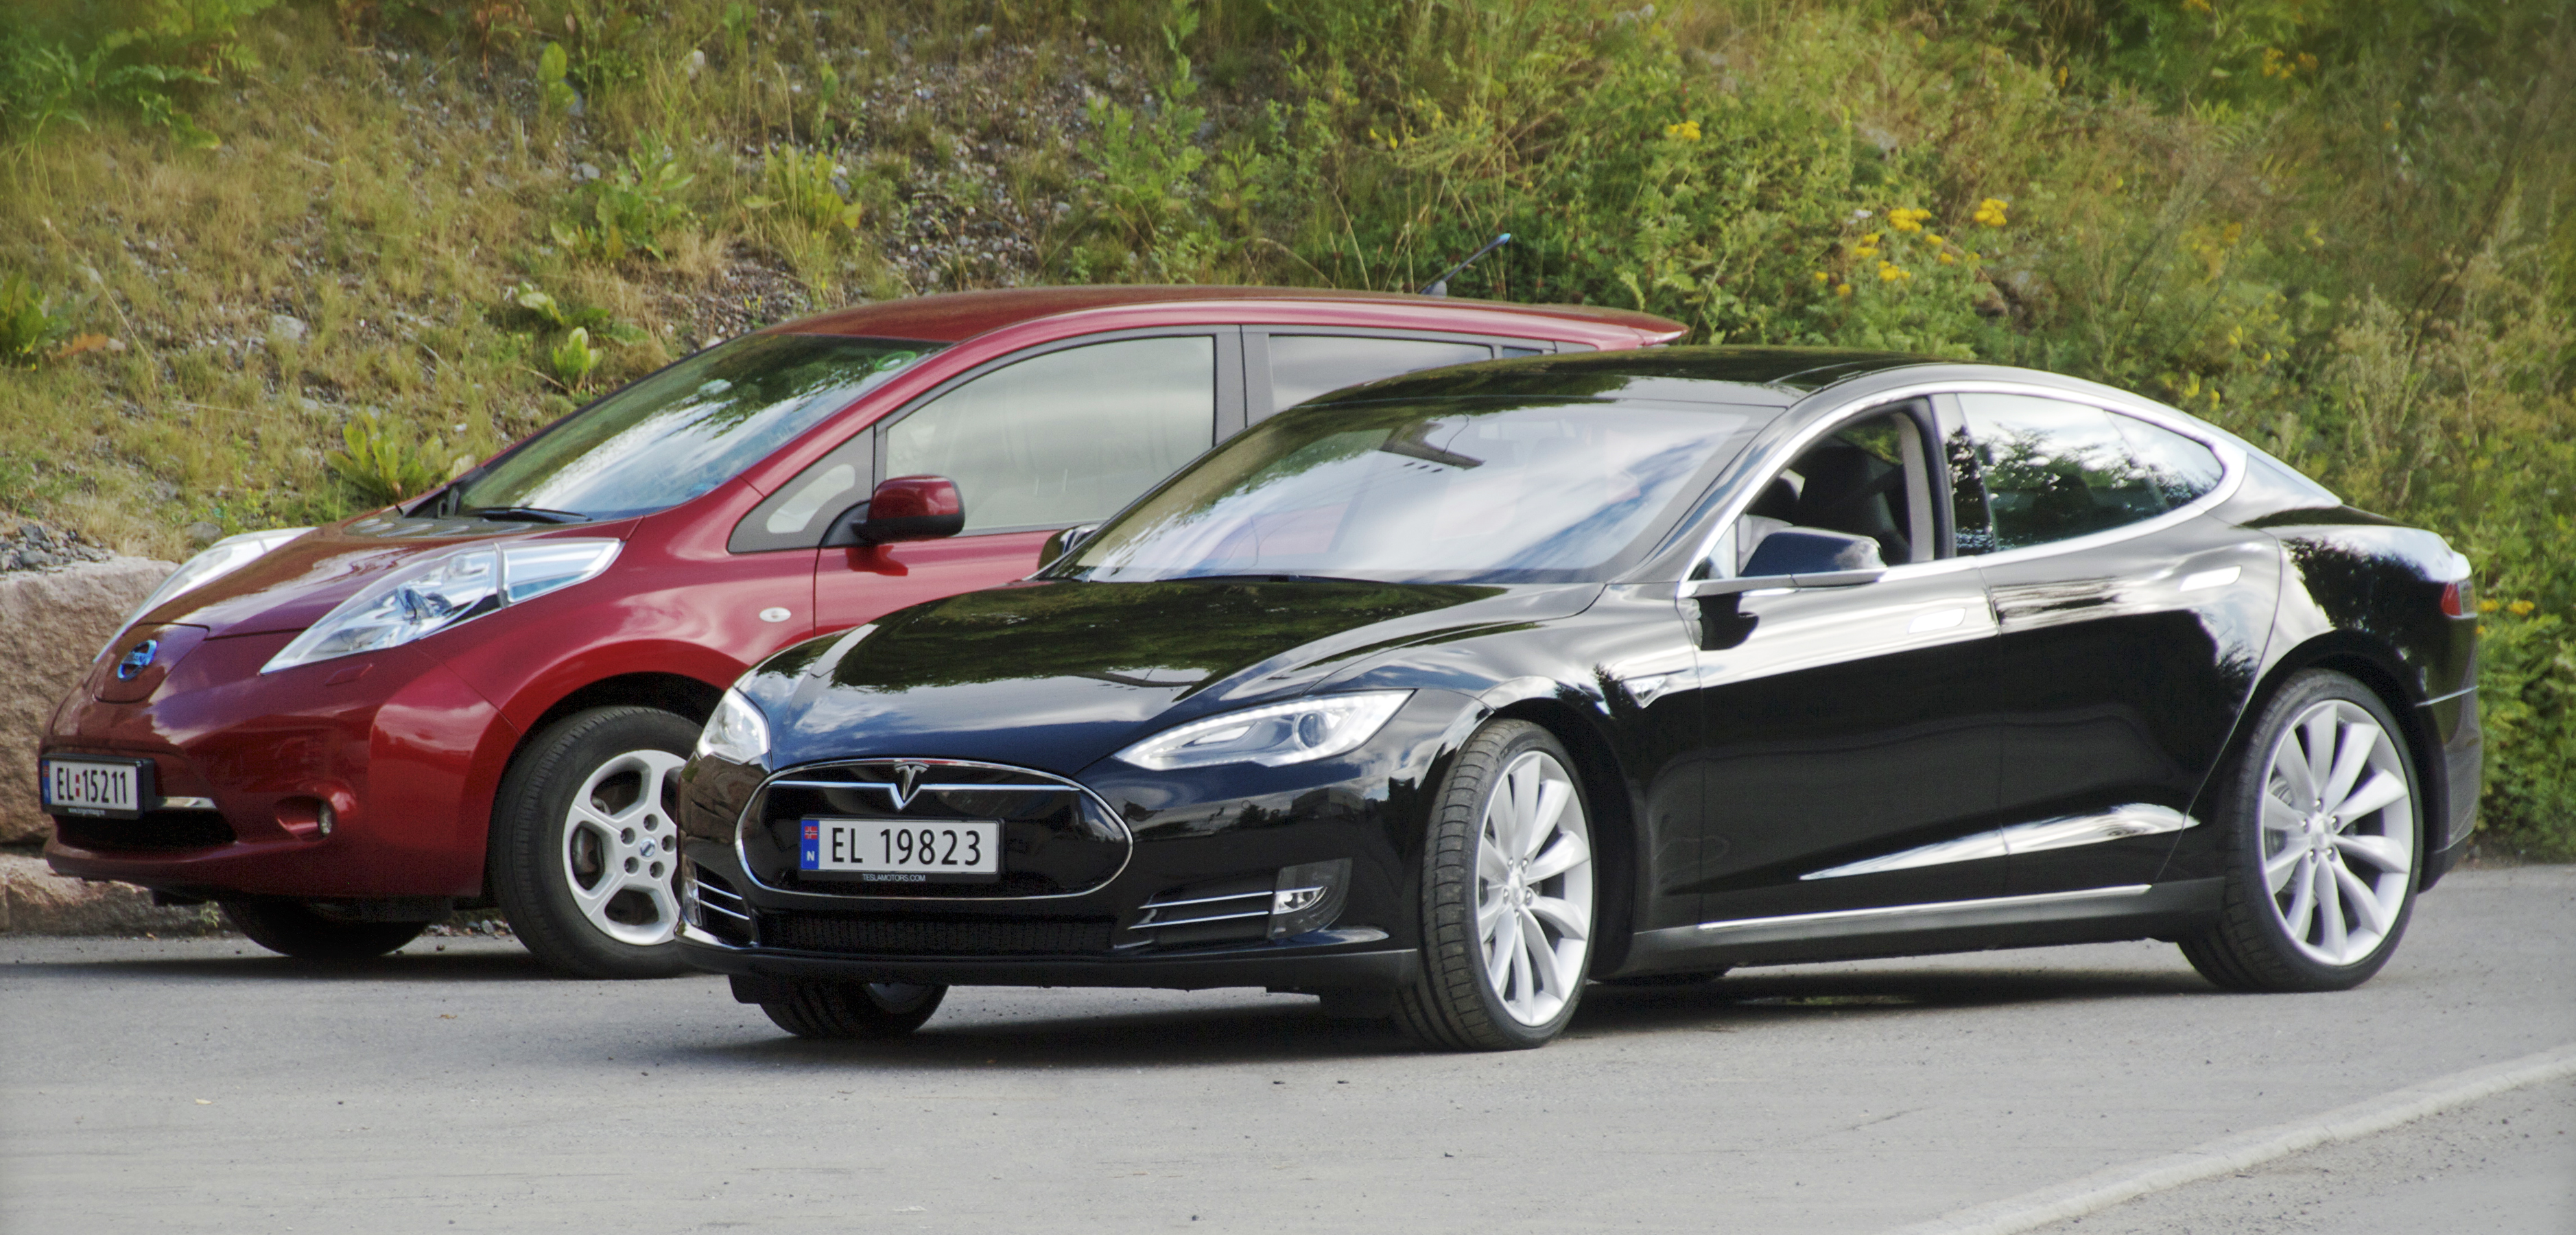 Nissan_Leaf_and_Tesla_Model_S_in_Norway_cropped